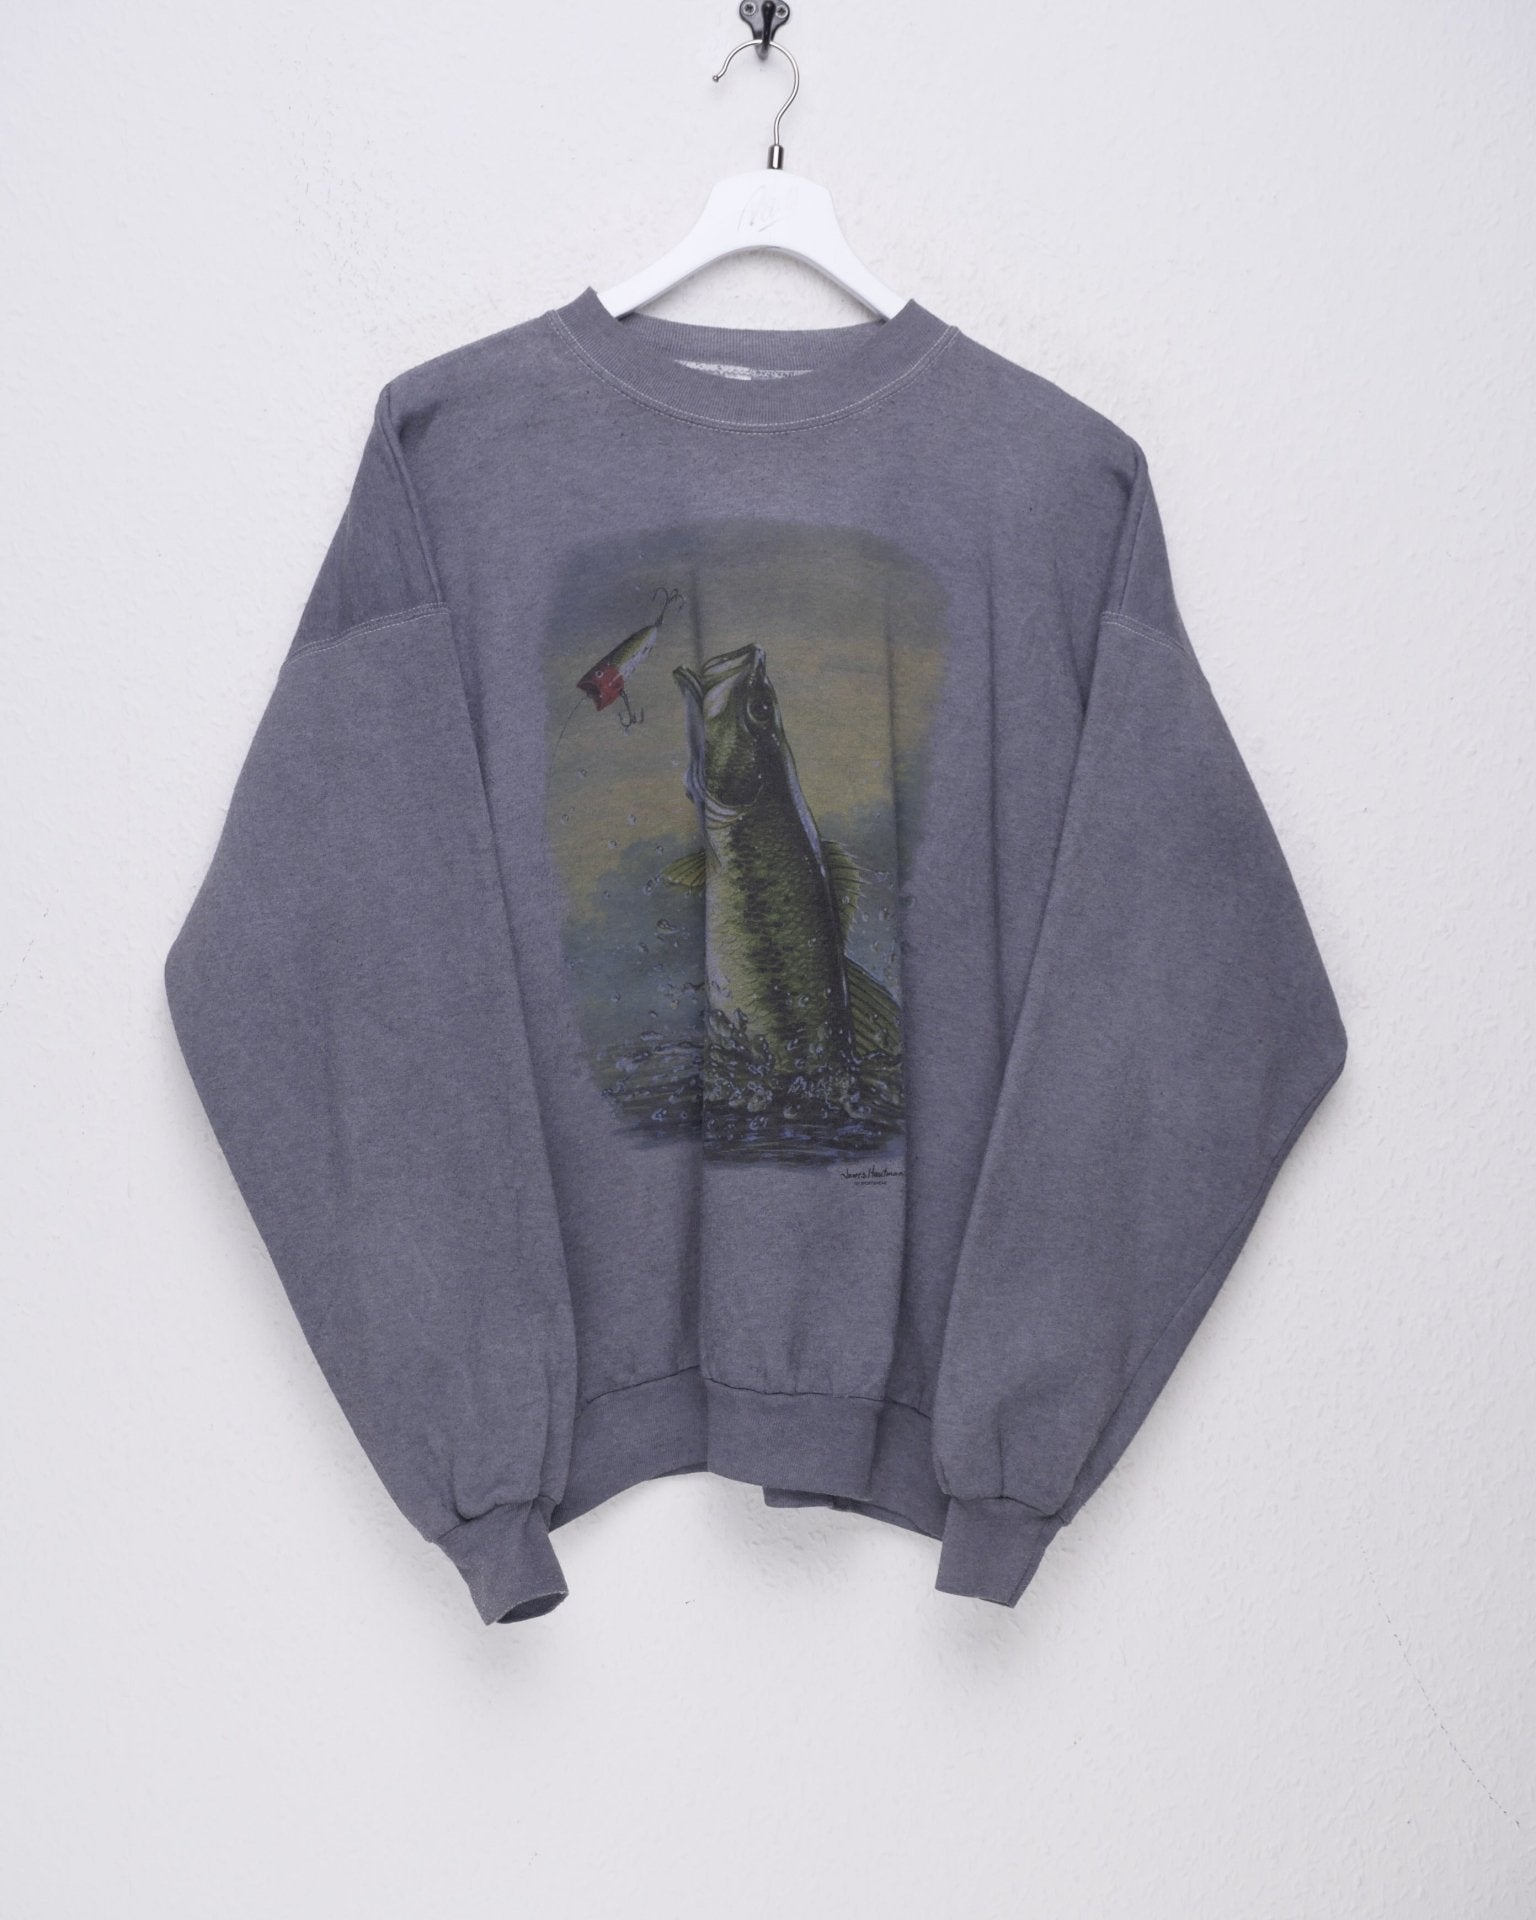 Fishing printed Graphic grey Sweater - Peeces